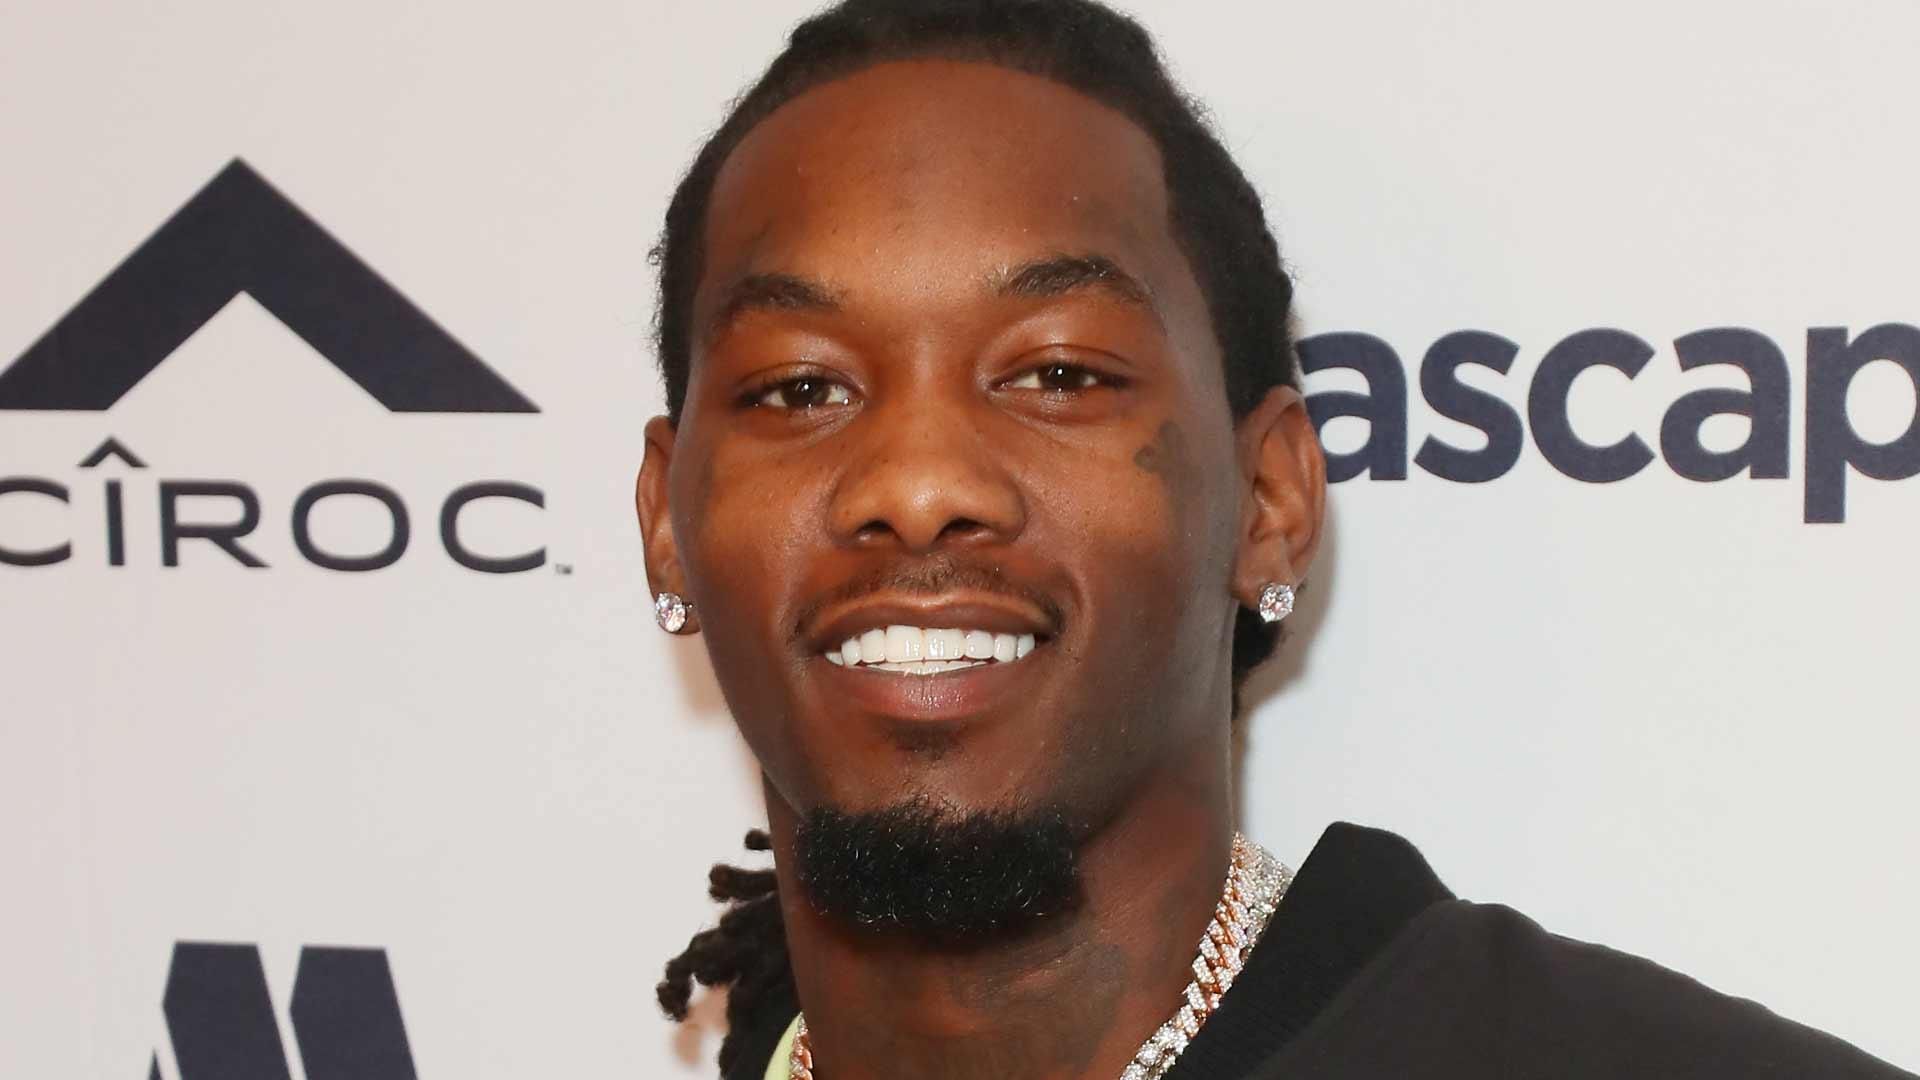 Offset Says Alleged Assault Victim Begged To Be Beaten Up, Demands Case Against Cardi B Be Thrown Out